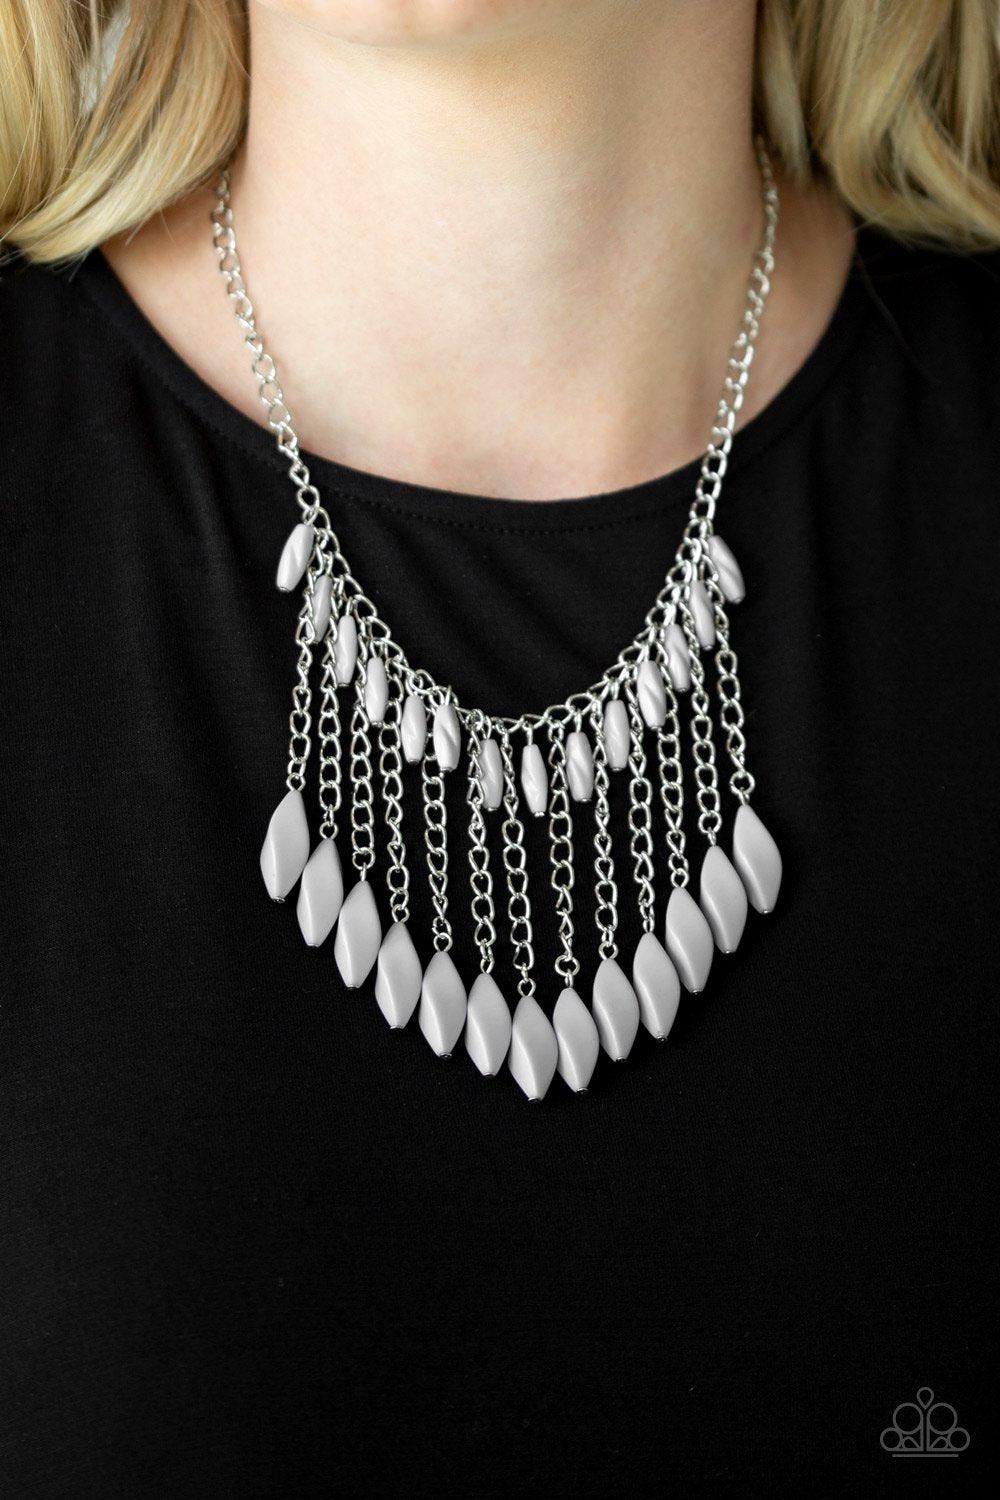 Venturous Vibes Silver Necklace - Paparazzi Accessories - model -CarasShop.com - $5 Jewelry by Cara Jewels